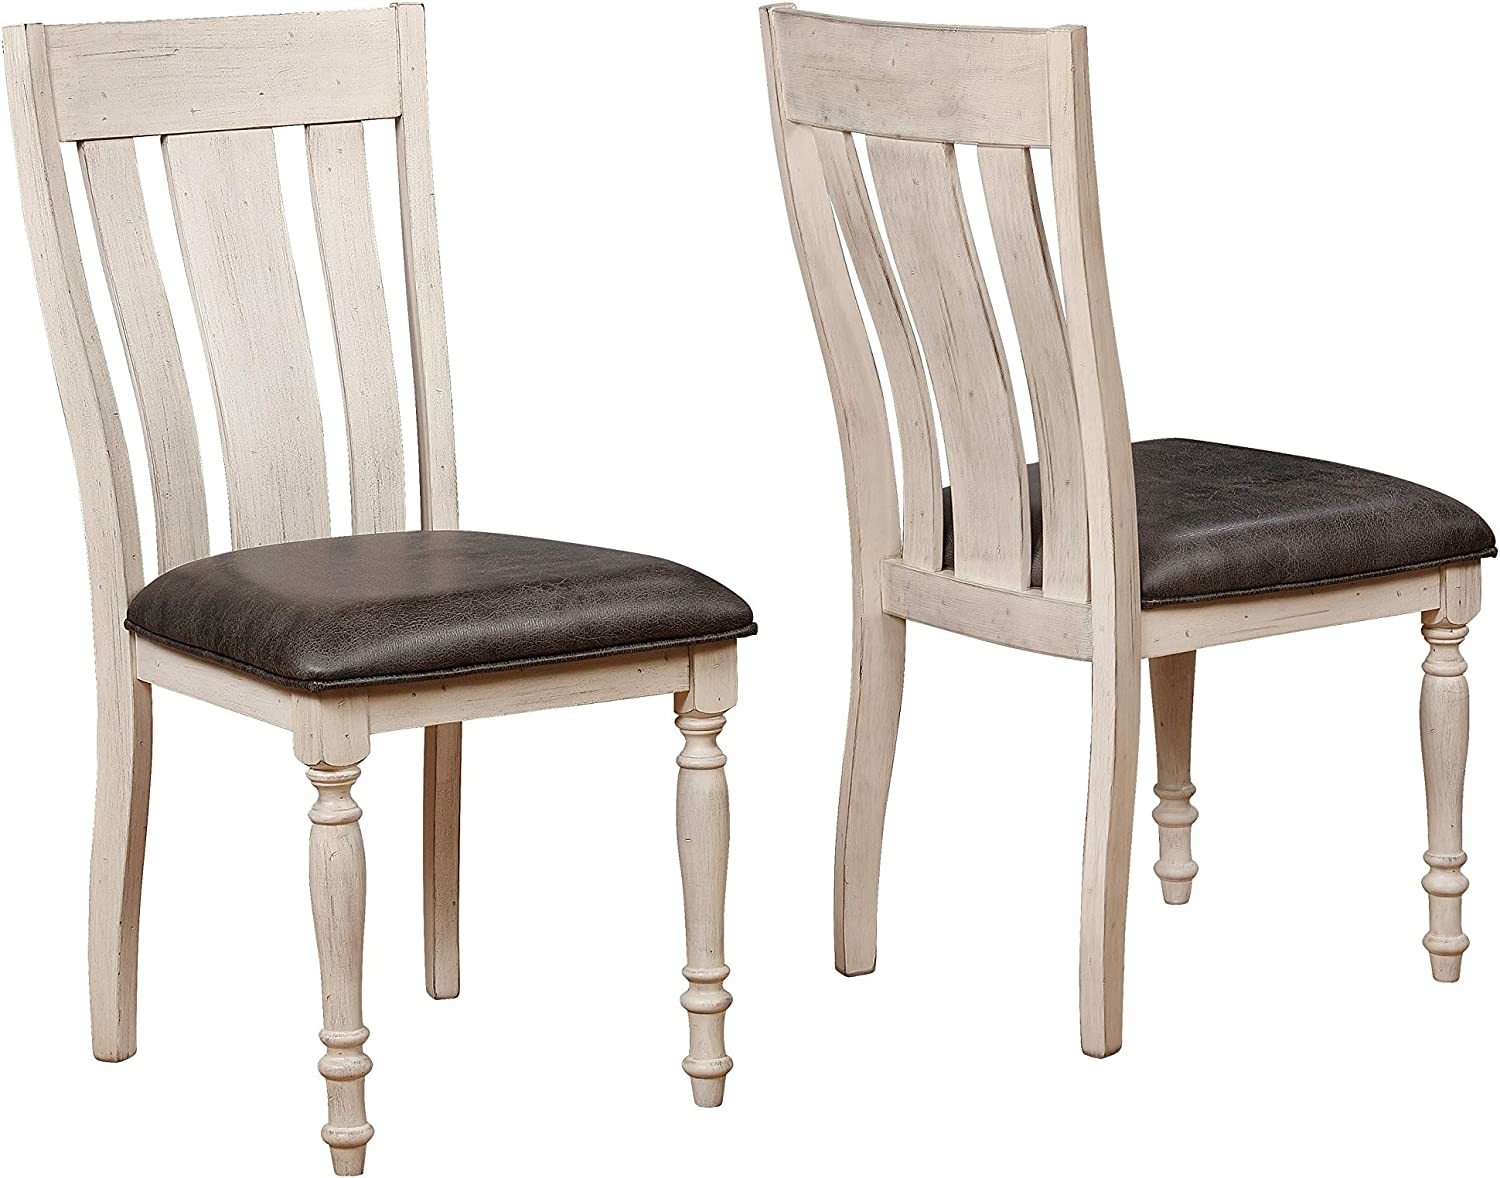 Primary image for Weathered Oak Dining Chair Set Of 2 By Roundhill Furniture.